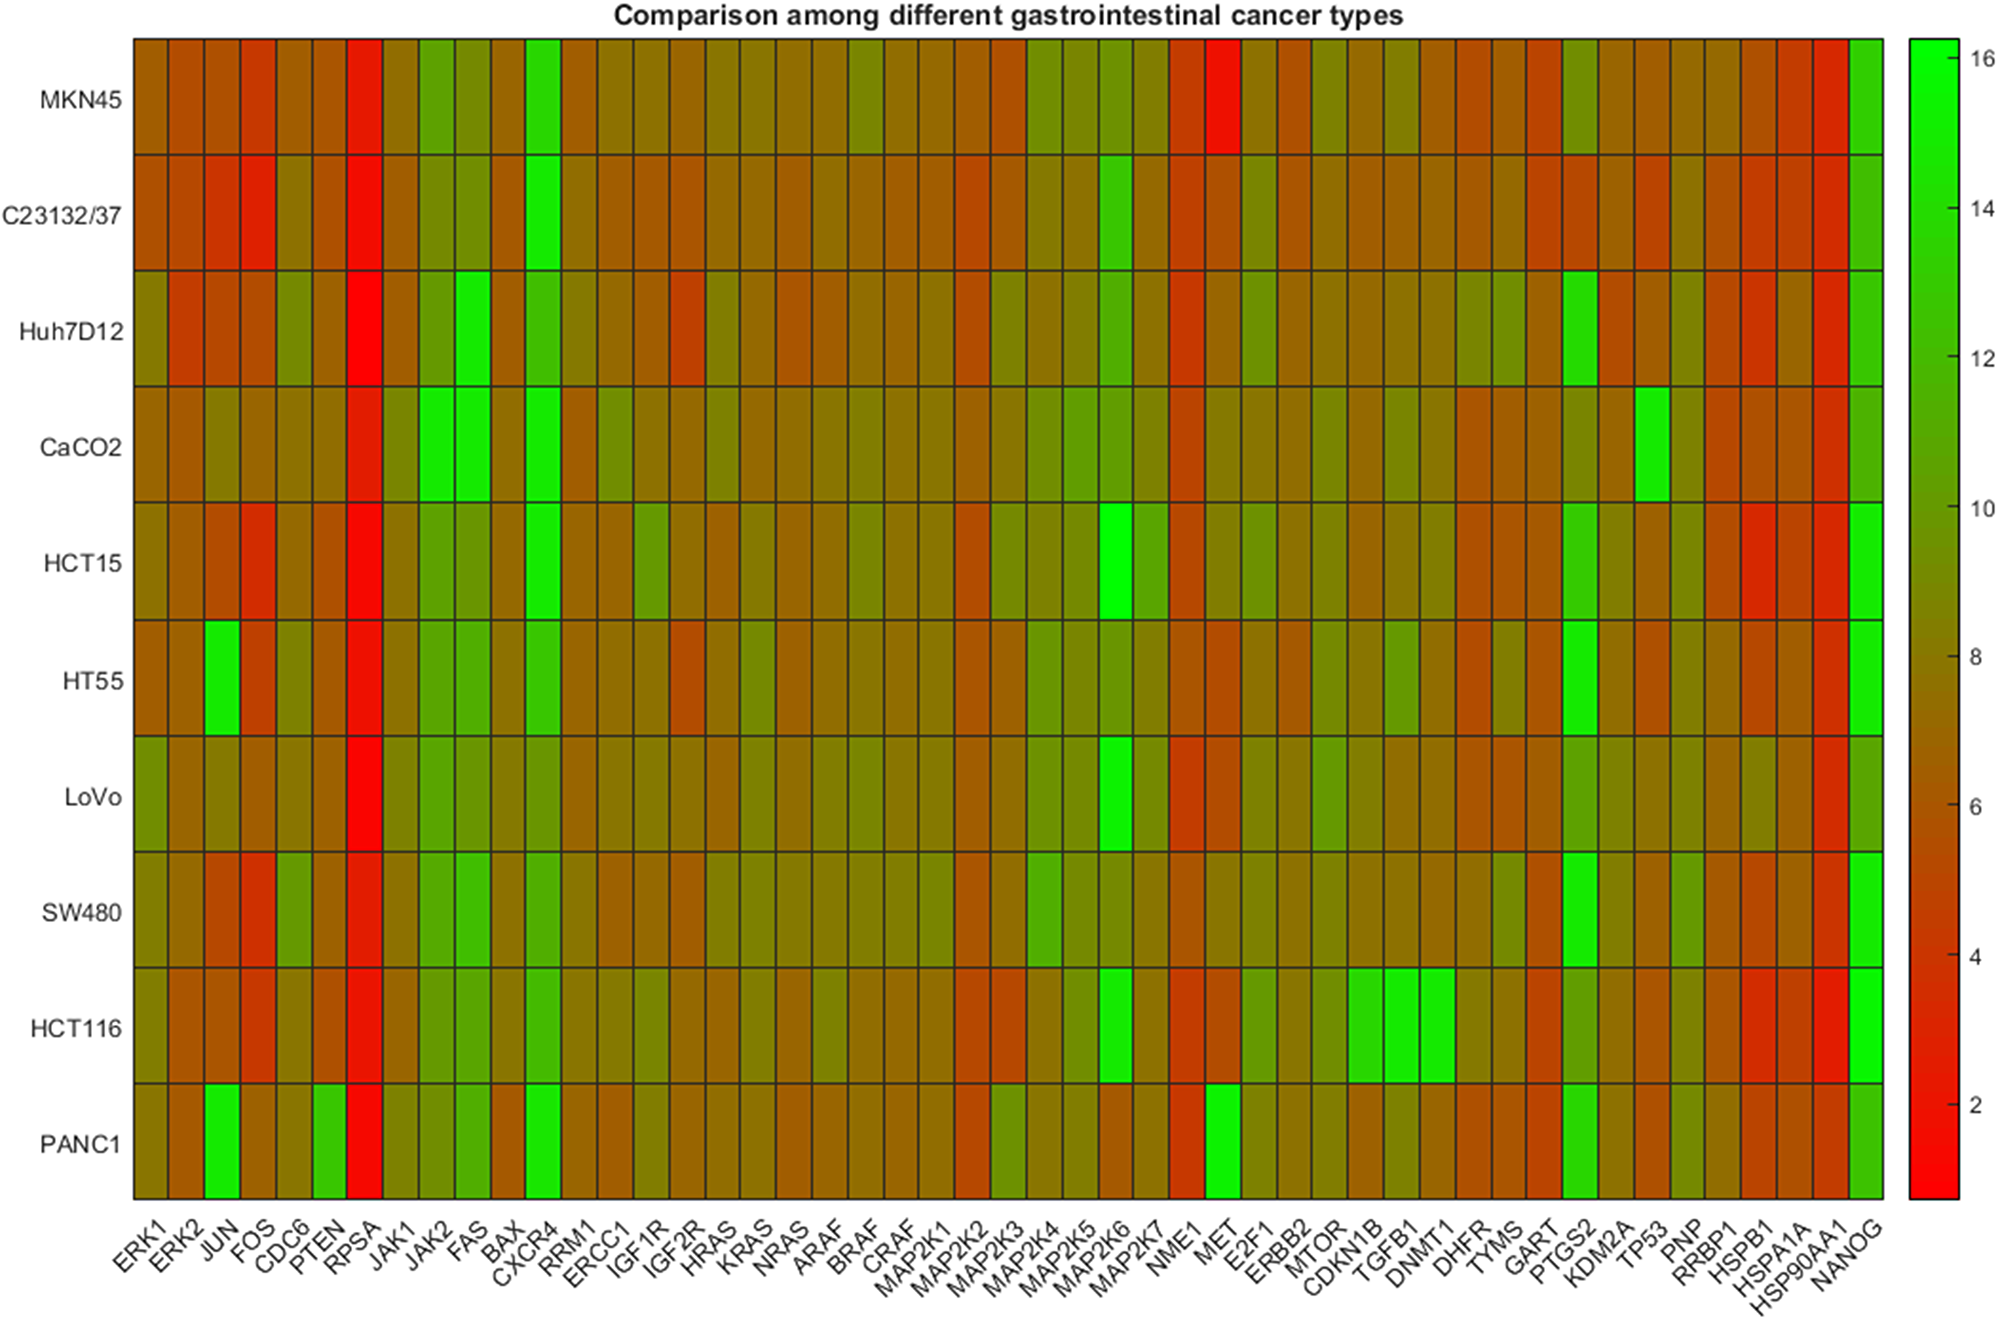 Gene expression data among cell lines representing different types of gastrointestinal cancer.